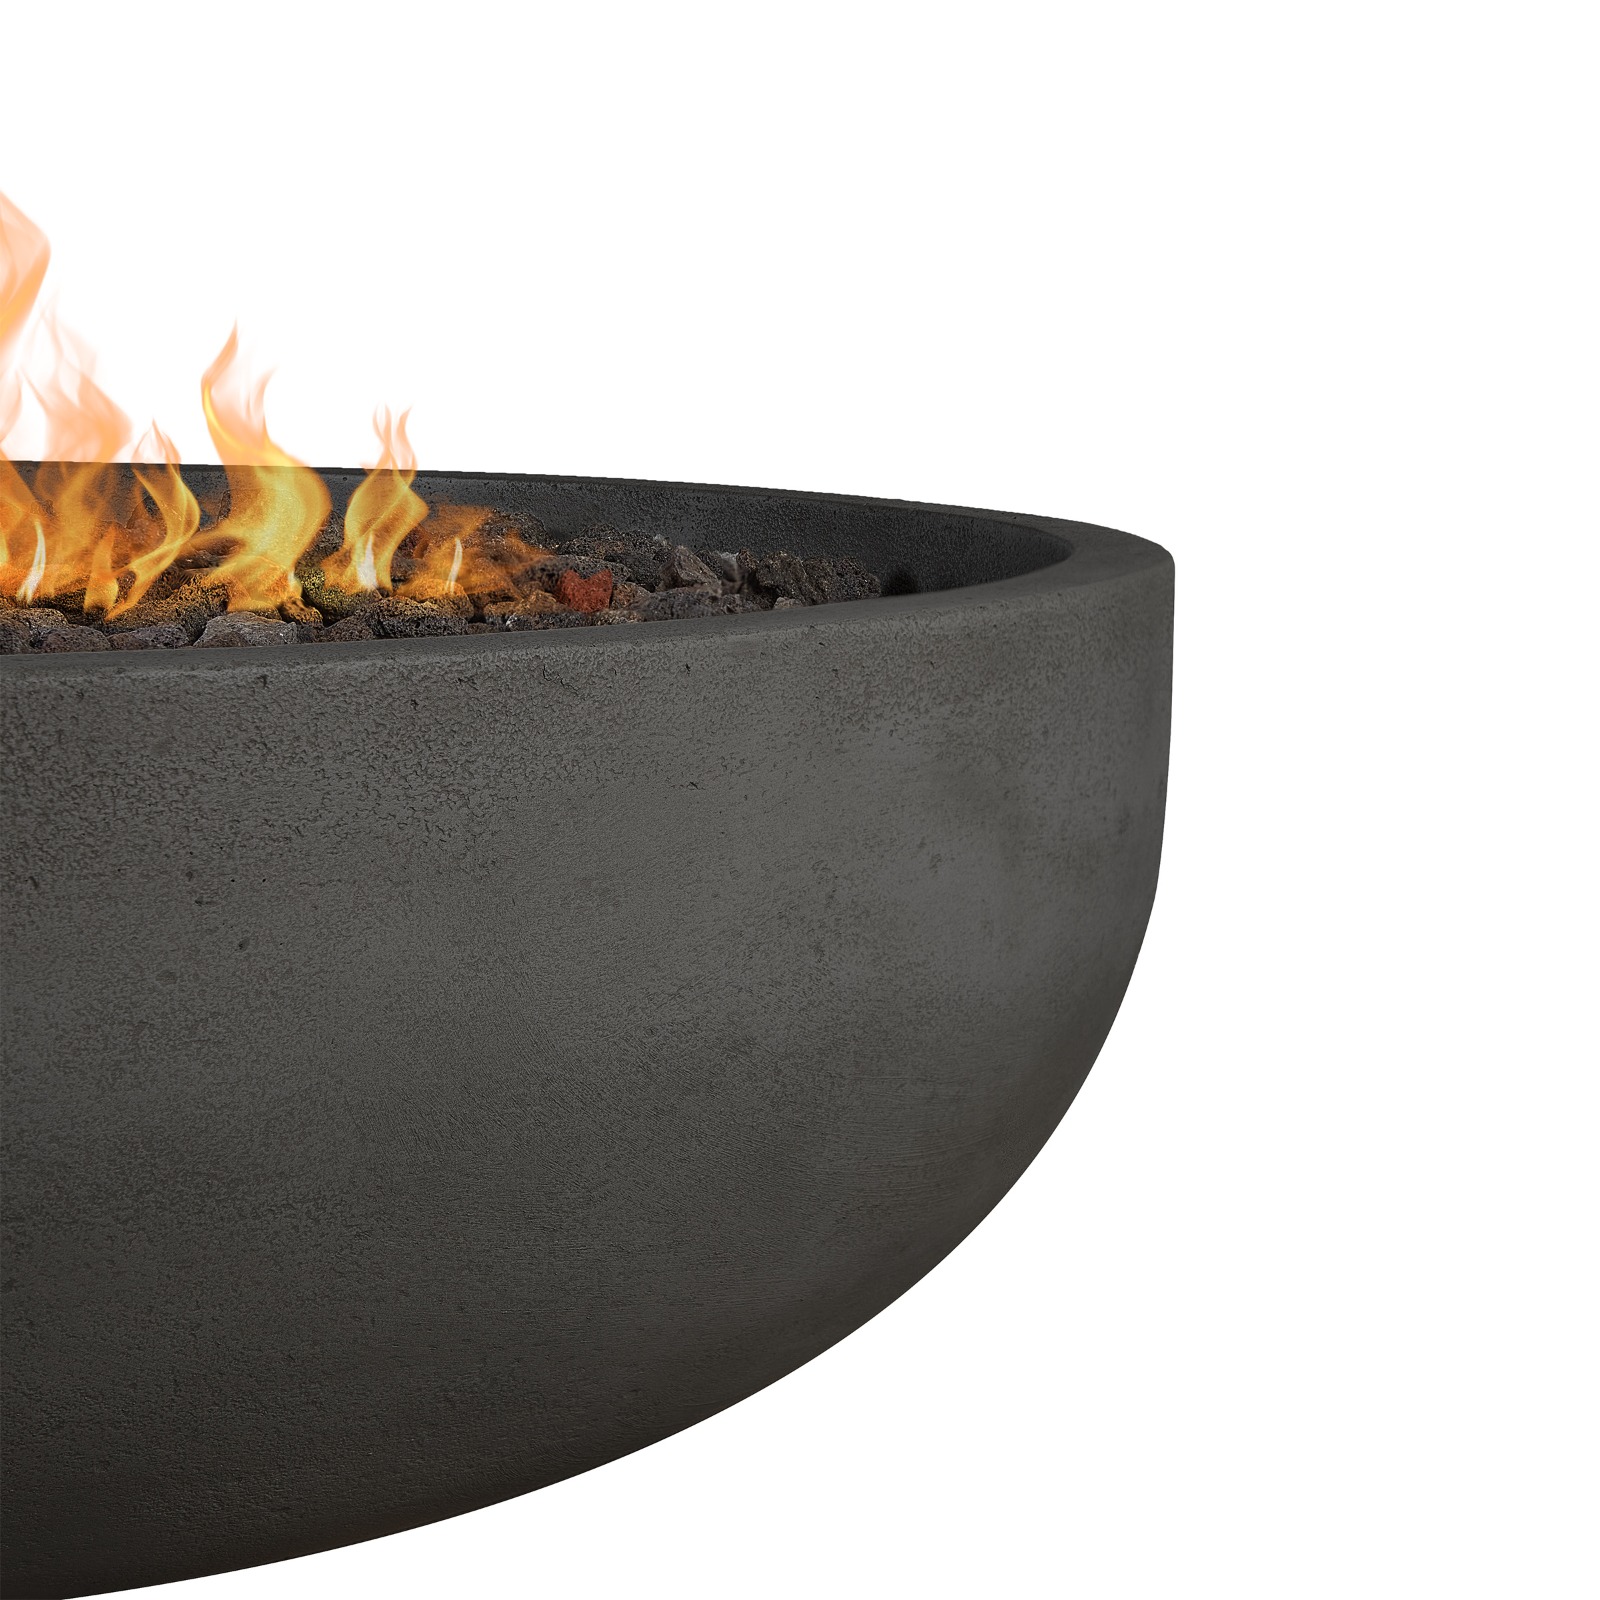 Carson 48" Propane Fire Pit Fire Bowl Outdoor Fireplace Fire Table for Backyard or Patio